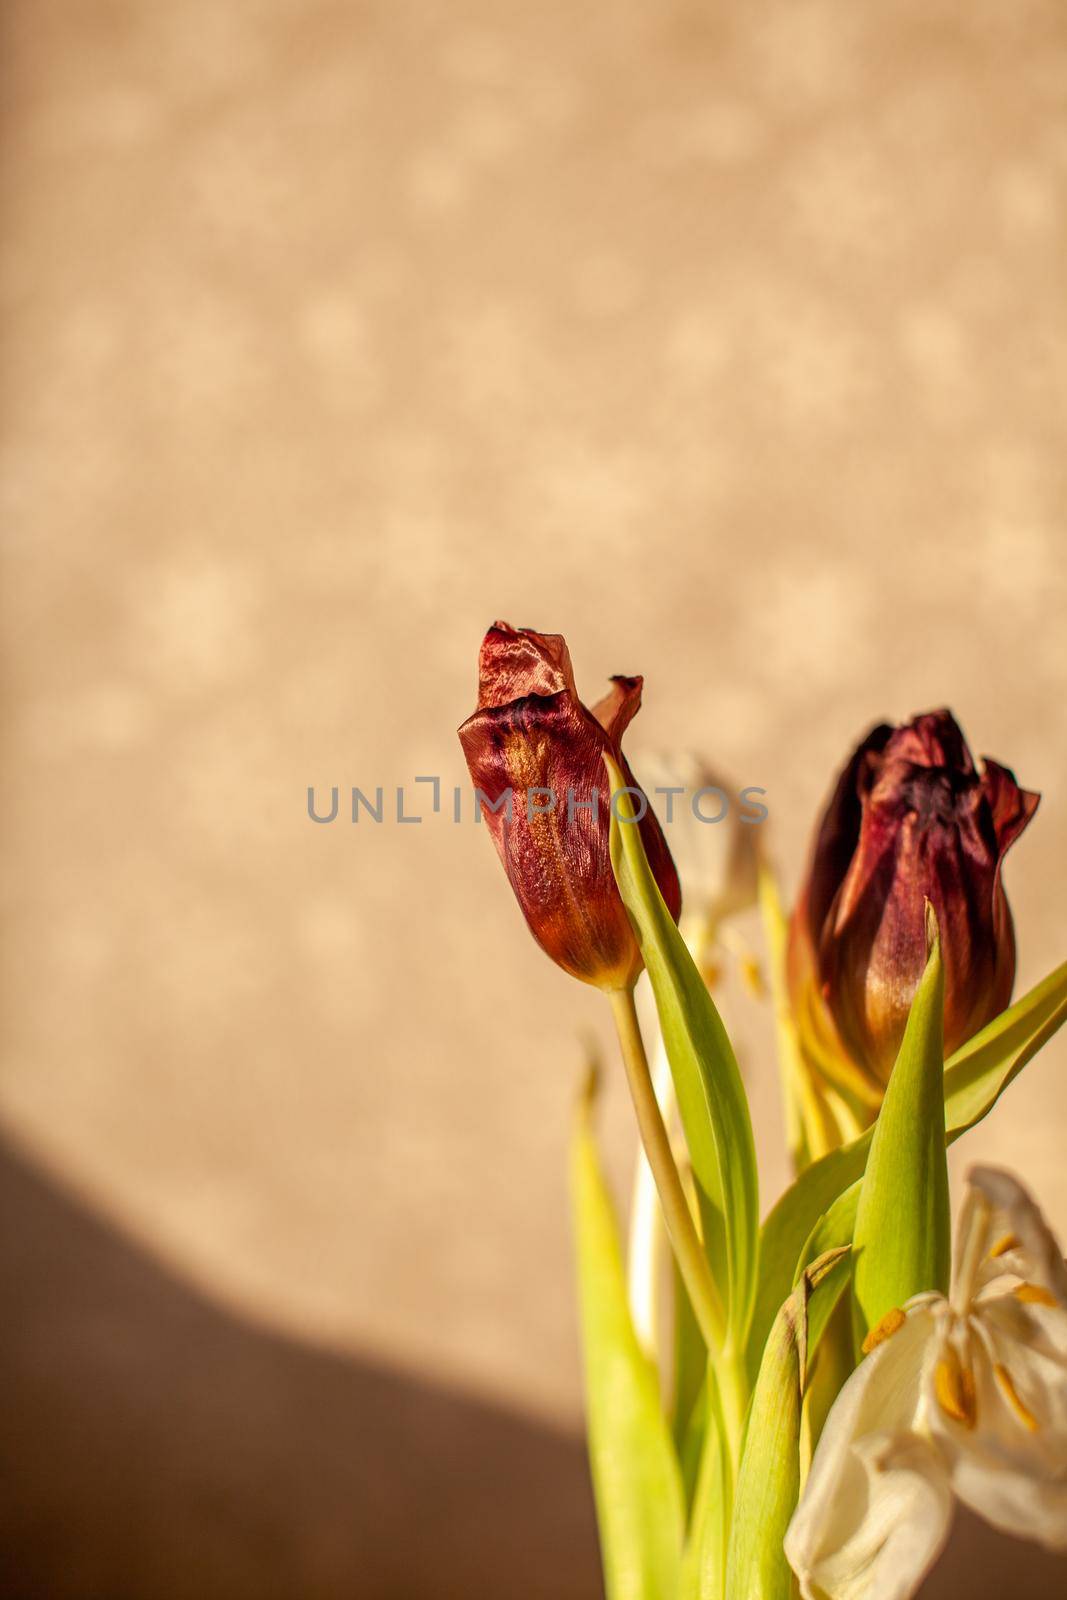 Flowers tulips at home in the warm rays of the winter sun. Beautiful decor and greeting card.